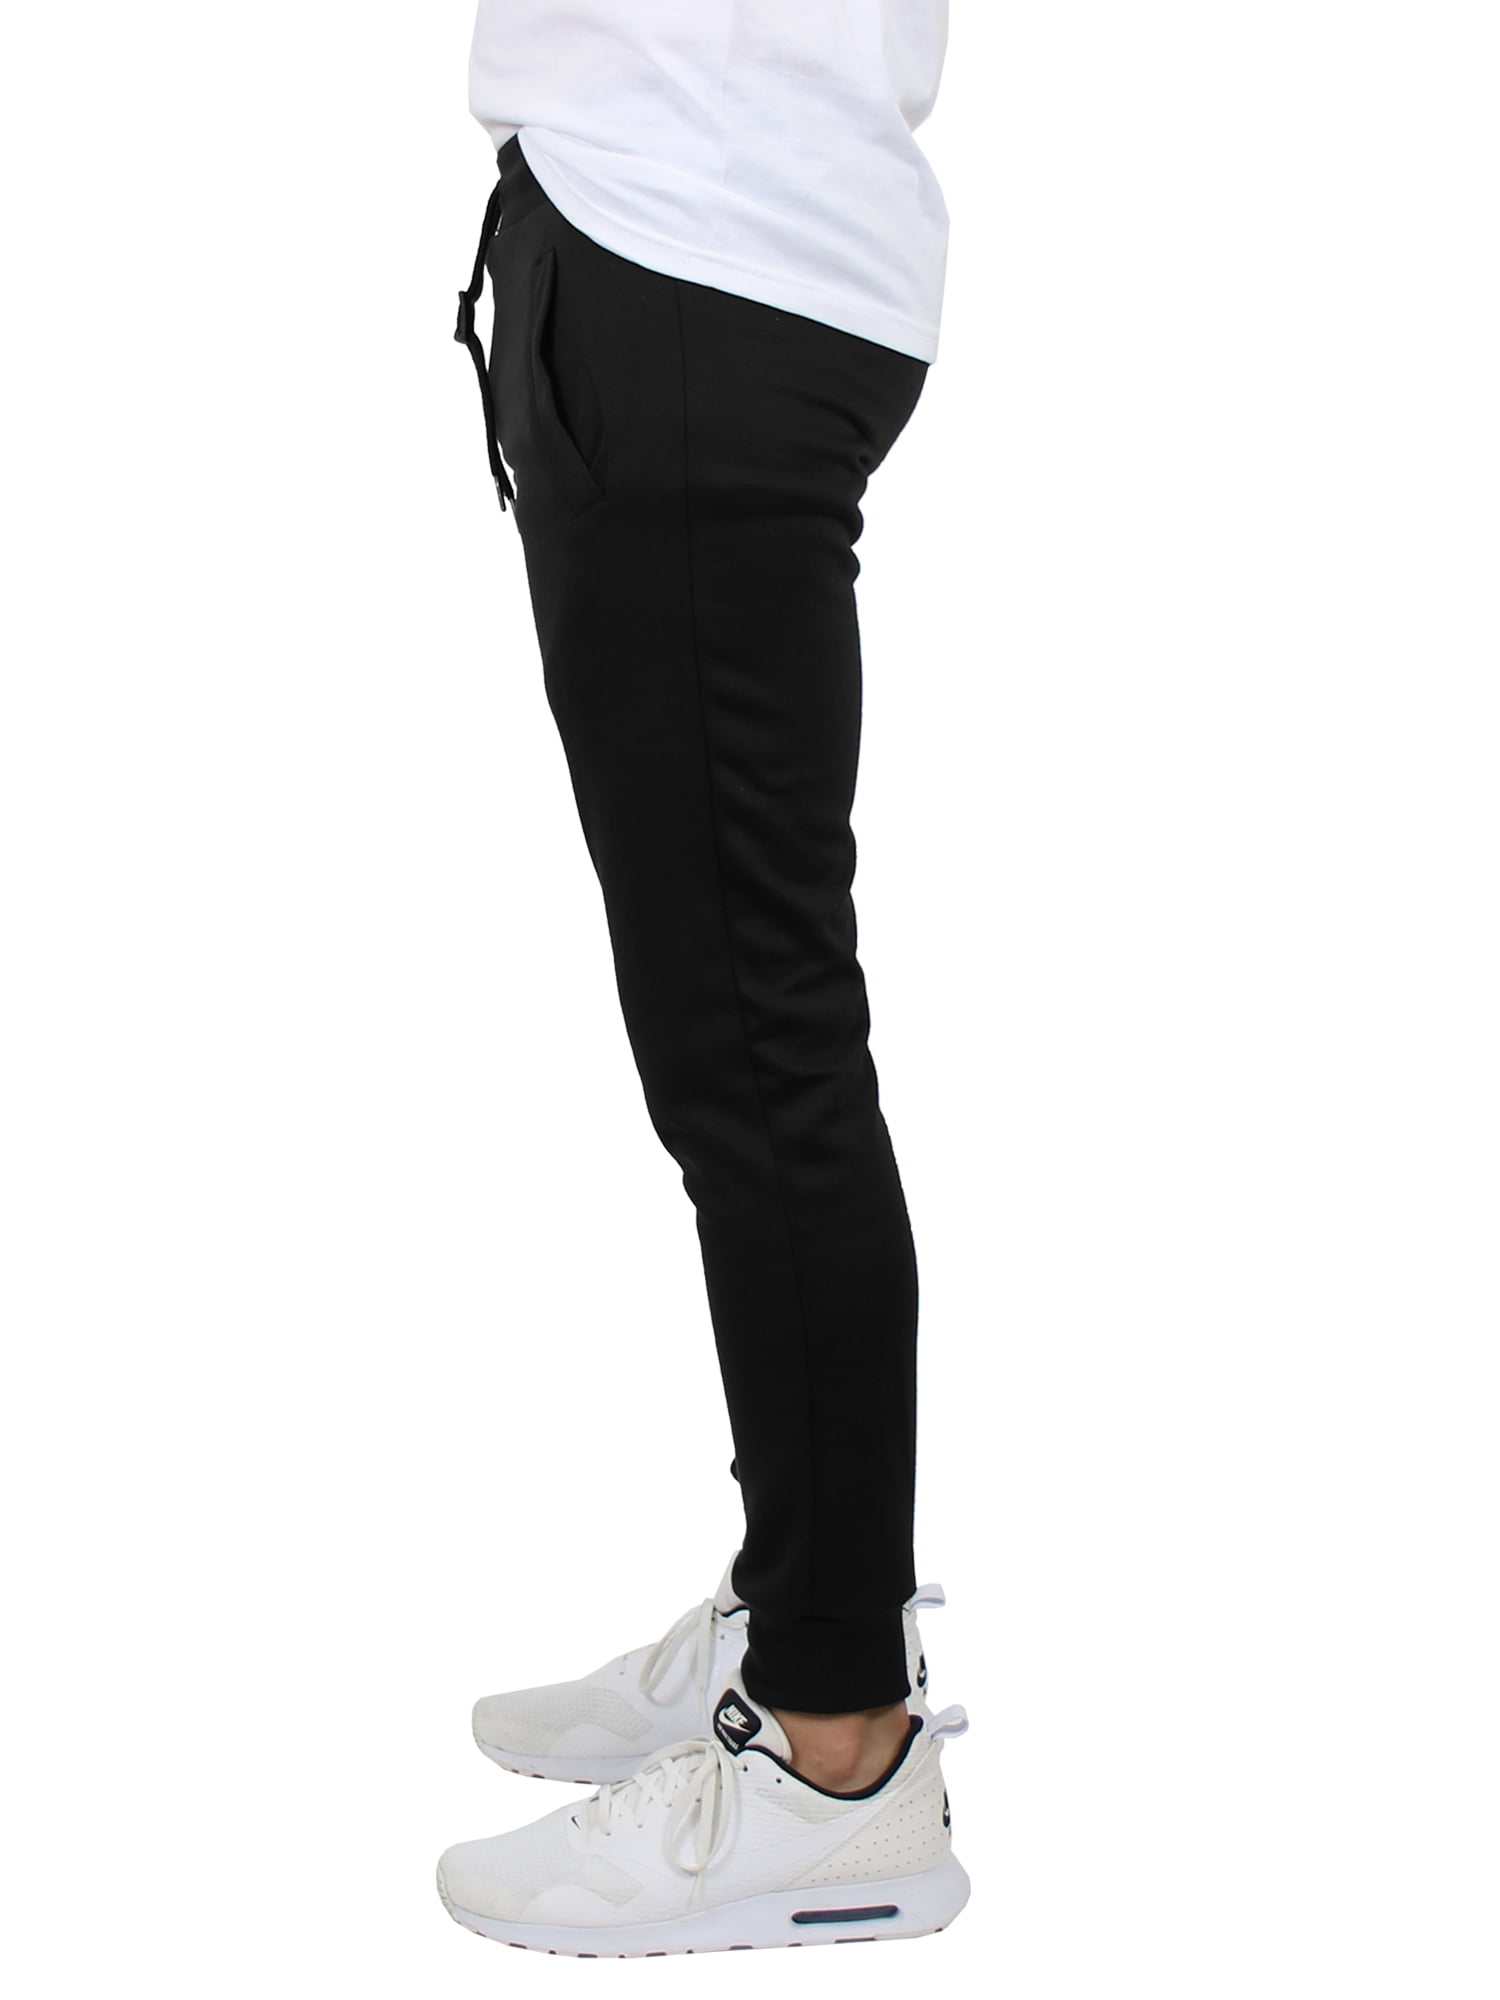 3-Pack Men\'s Fleece & French Terry Slim-Fit Jogger (Size, S-2XL)